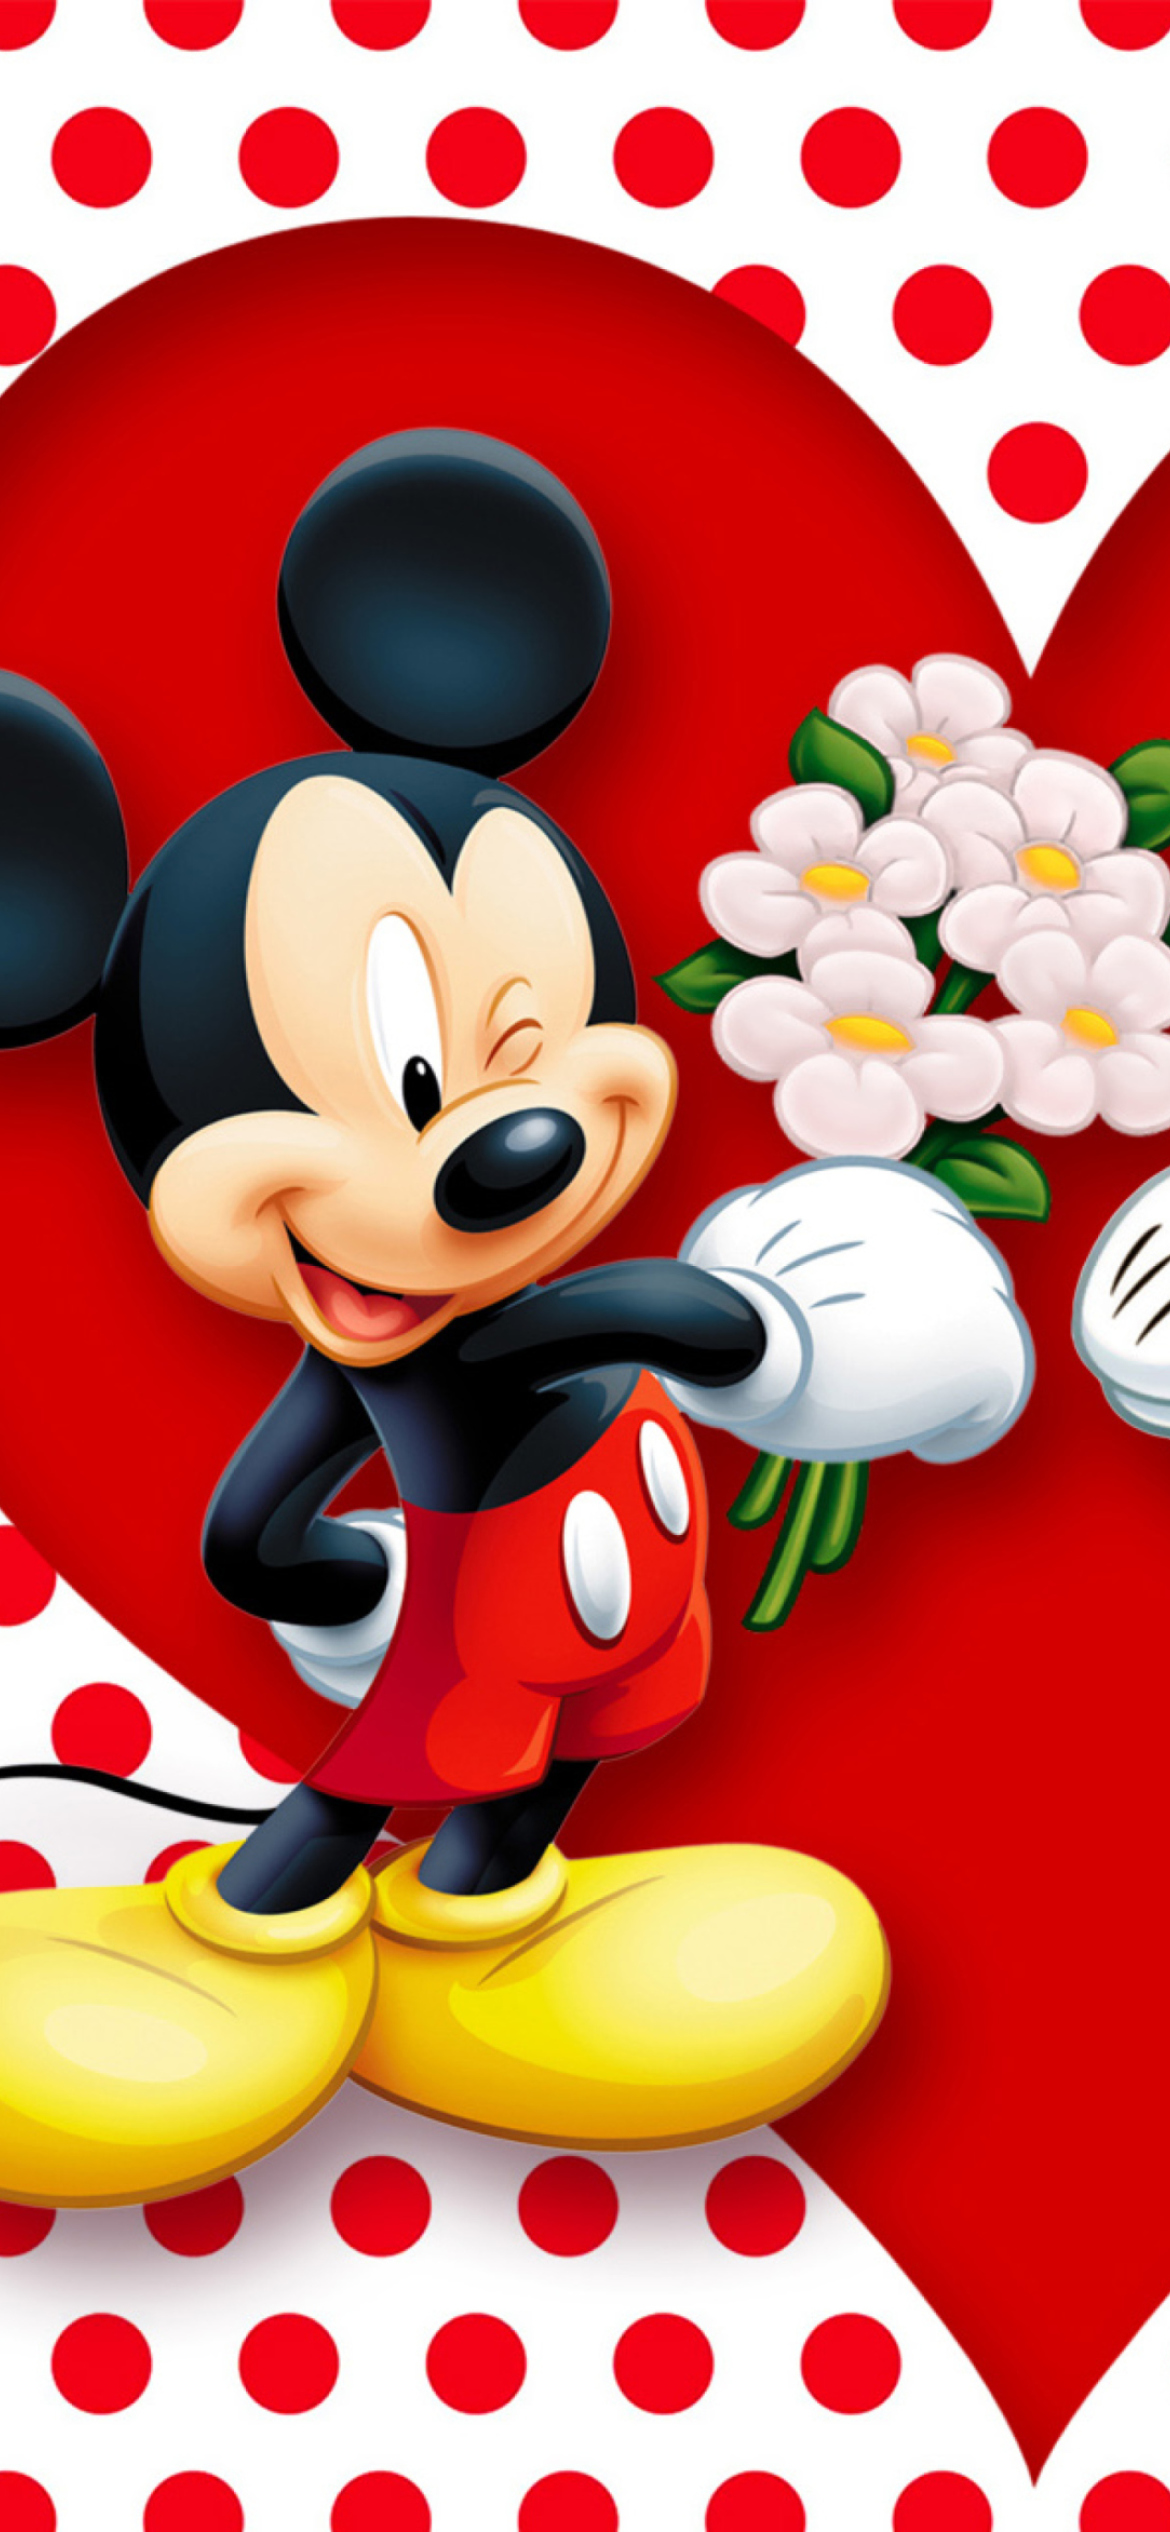 Minnie Mouse wallpaper by Iasiay  Download on ZEDGE  9b6c